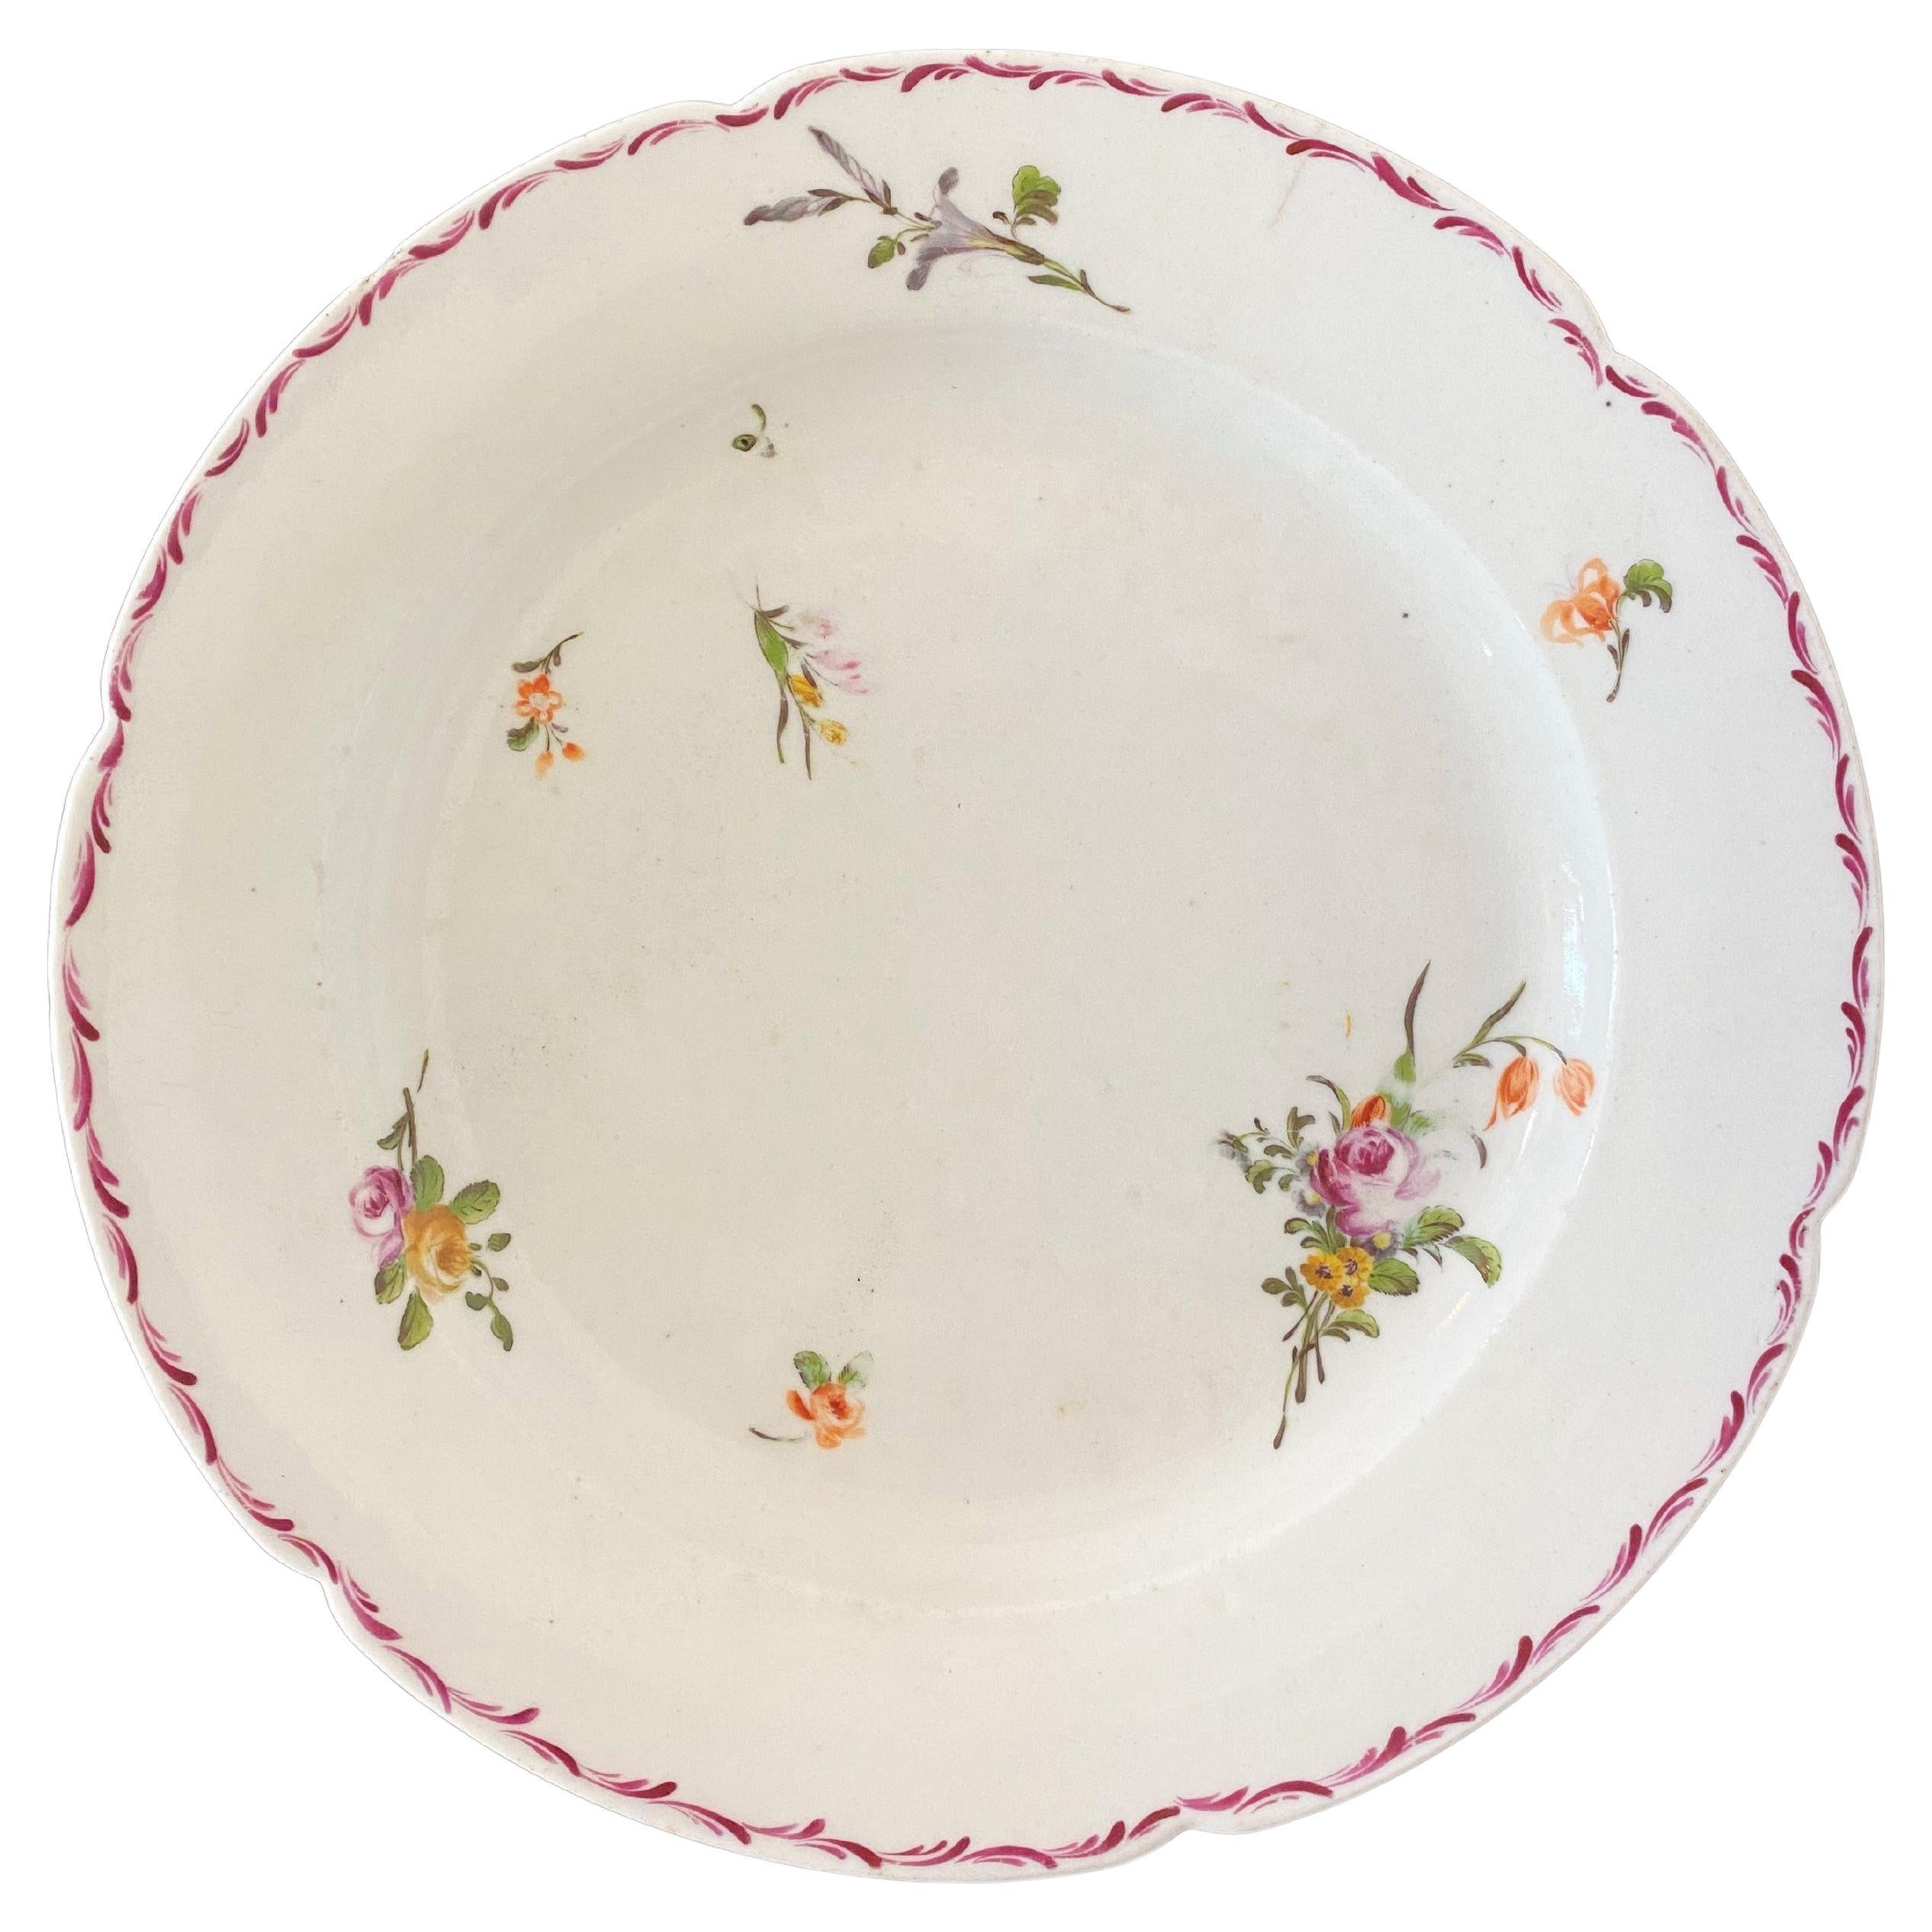 18th Century Chinese Flower Plate from the Compagnie Des Indes